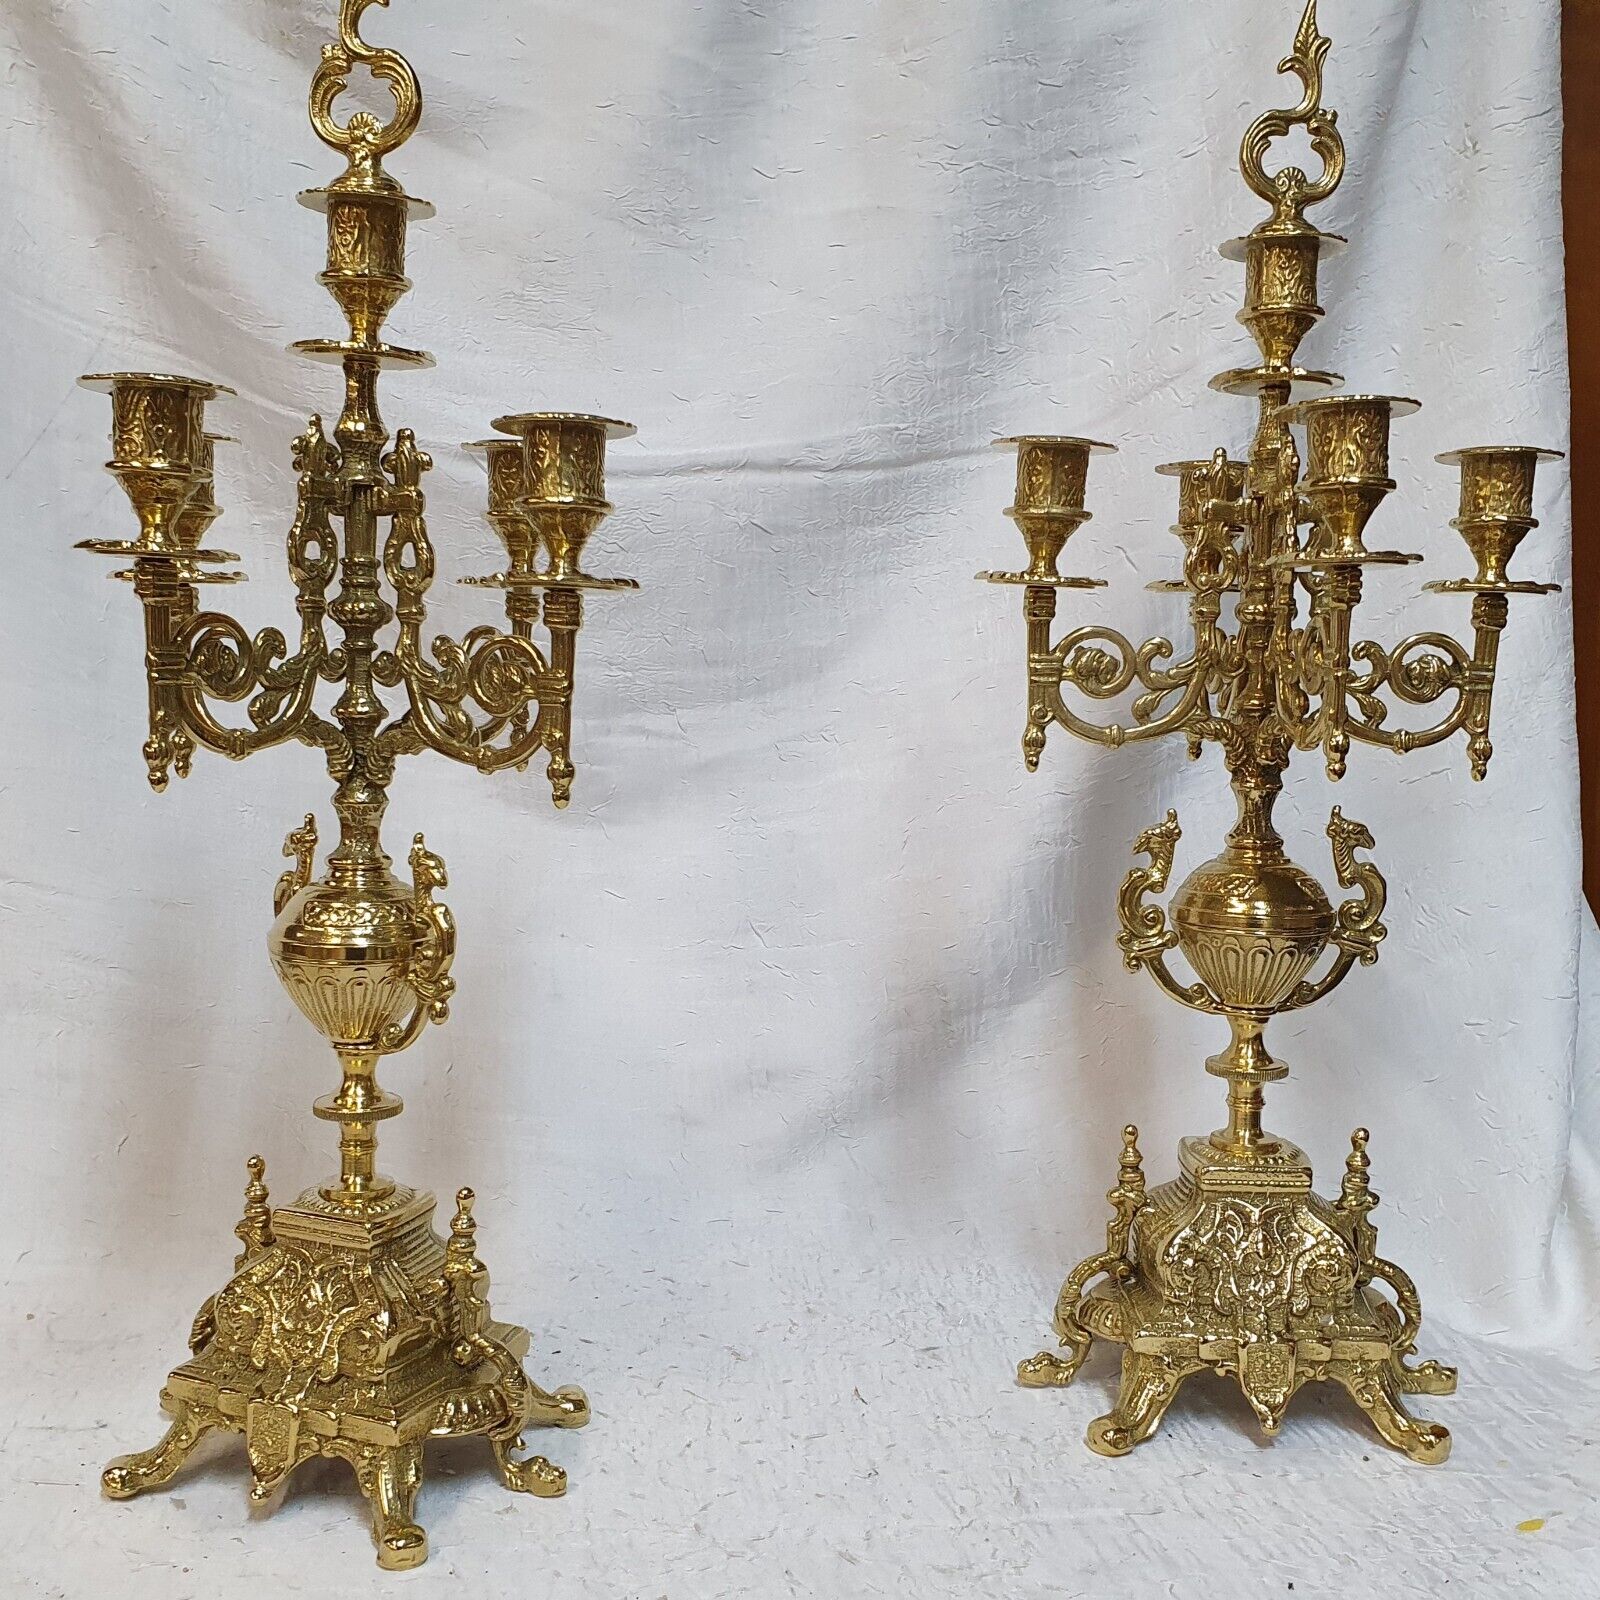 RARE LOT OF TWO LARGE CATHEDRAL CANDLESTICKS BAROQUE STYLE SOLID BRONZE 